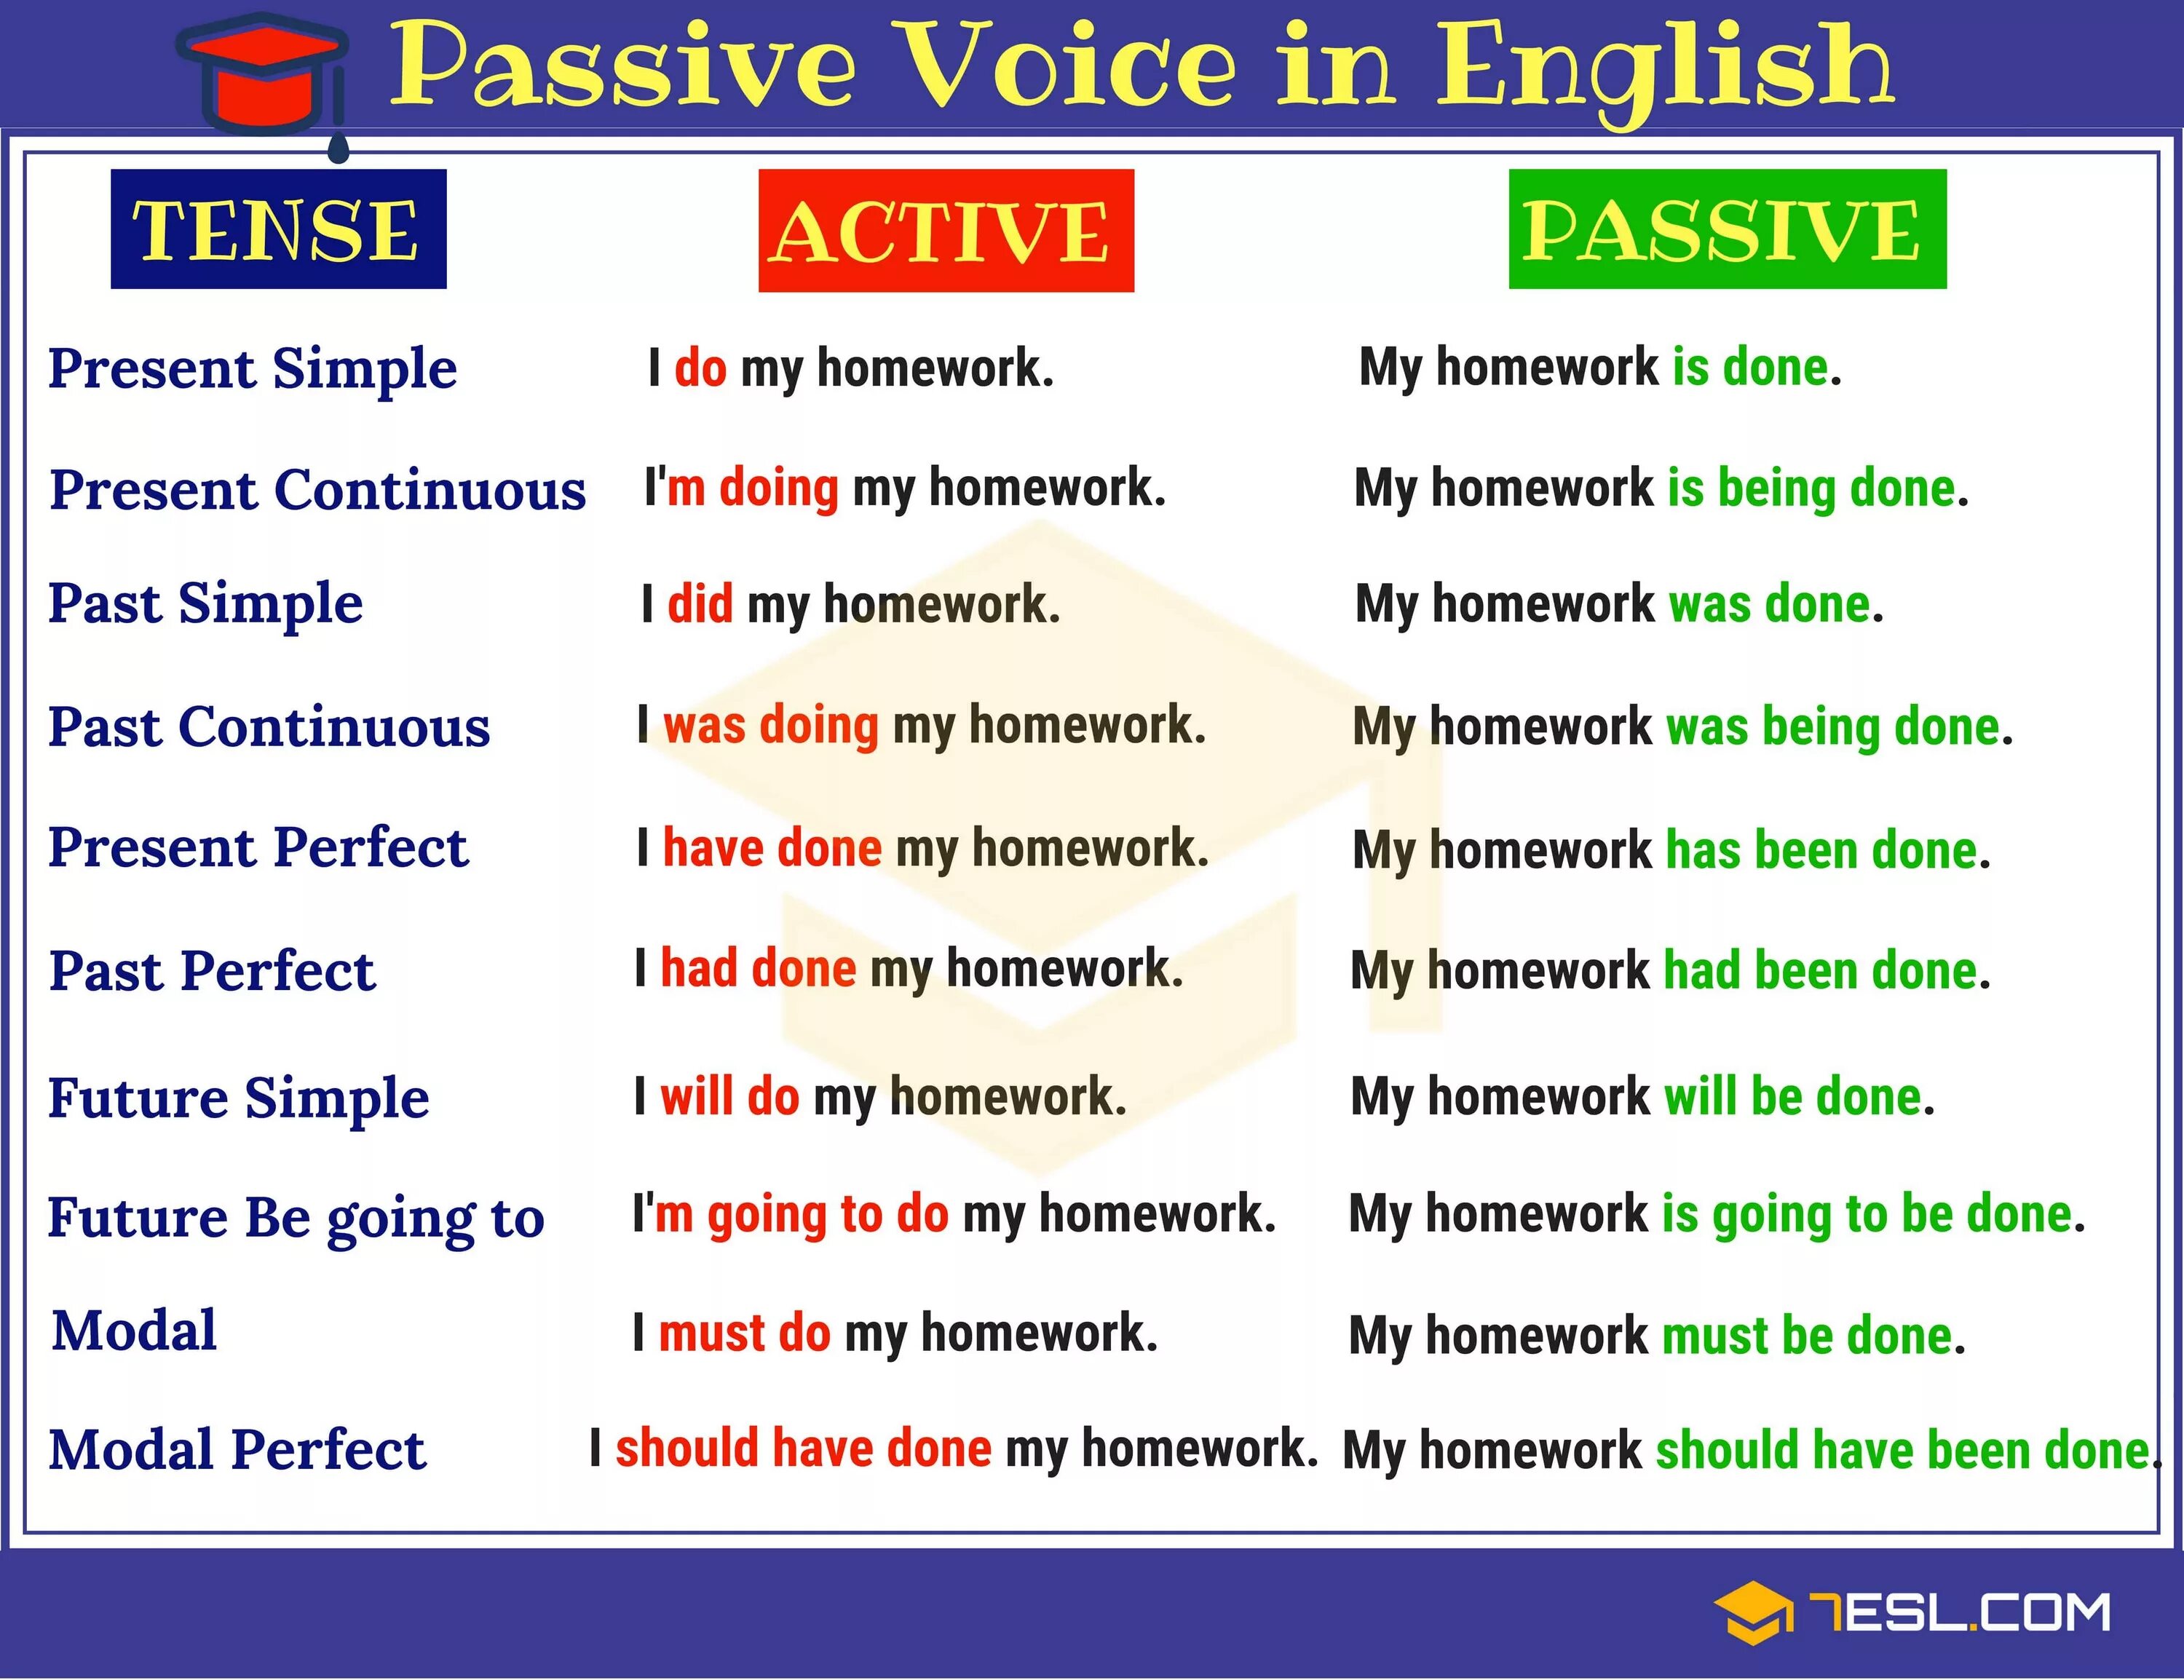 Actions rules. Active and Passive Voice in English Grammar. Active and Passive Voice грамматика. English Tenses Active and Passive. English Tenses Passive Voice.